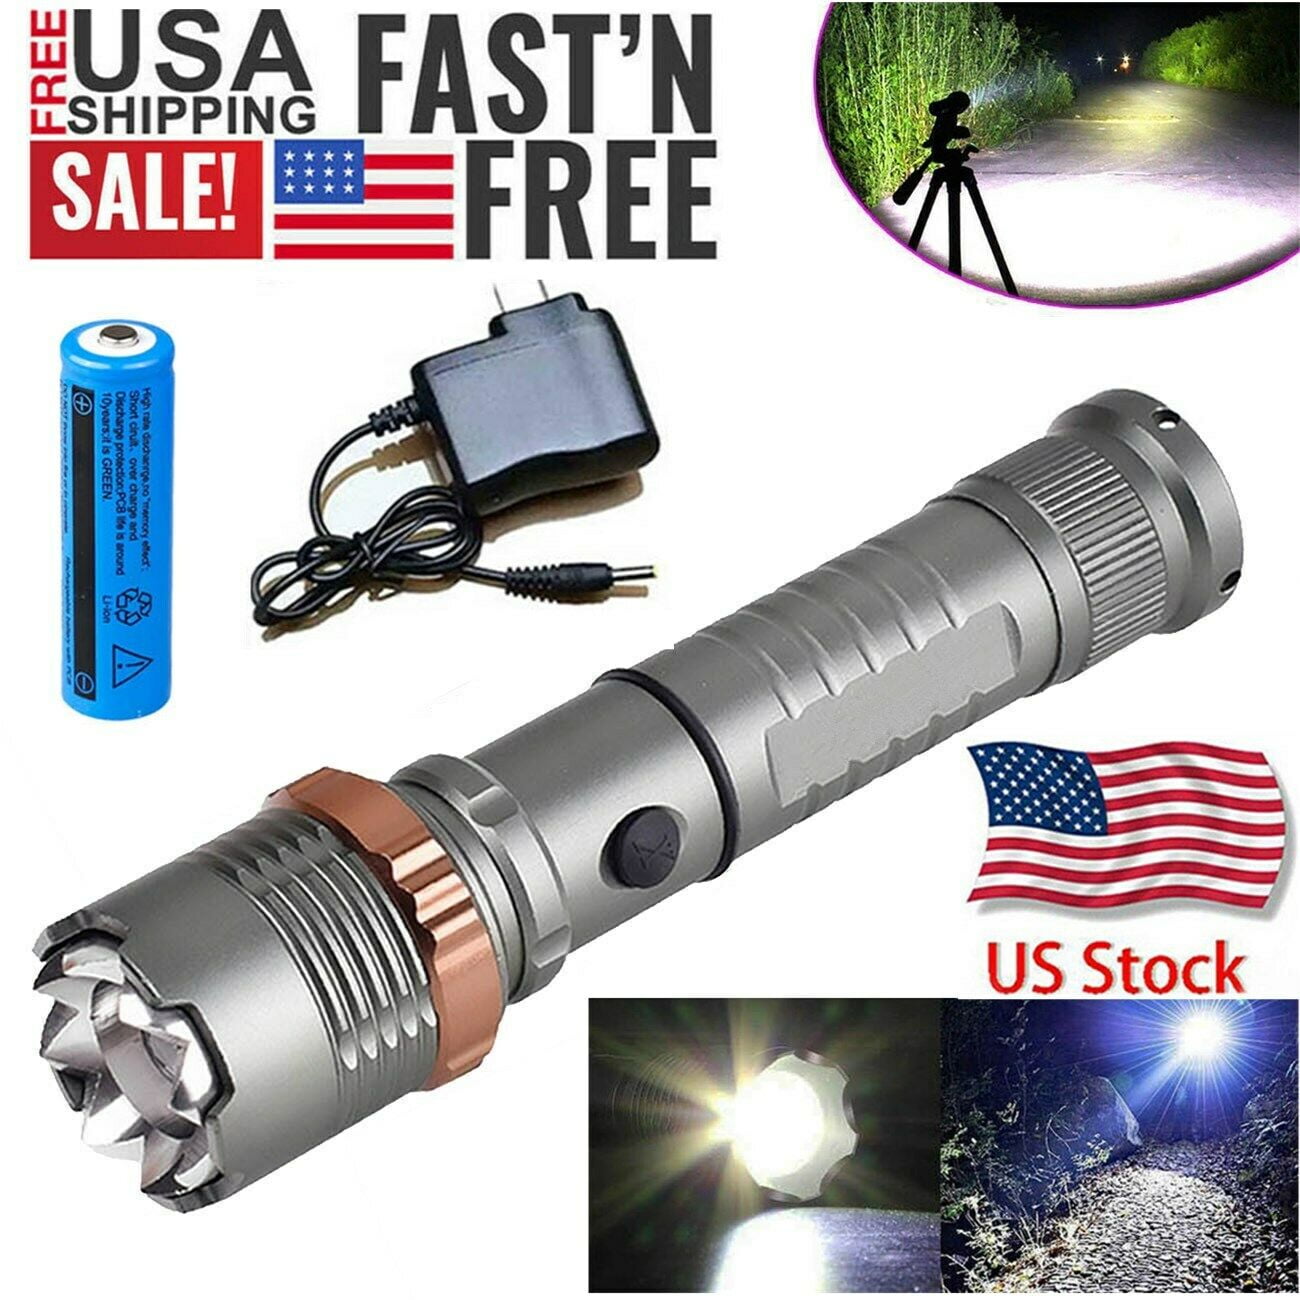 4* Tactical 990000LM LED Flashlight Ultra Bright Zoomable Power Torch Light Lamp 